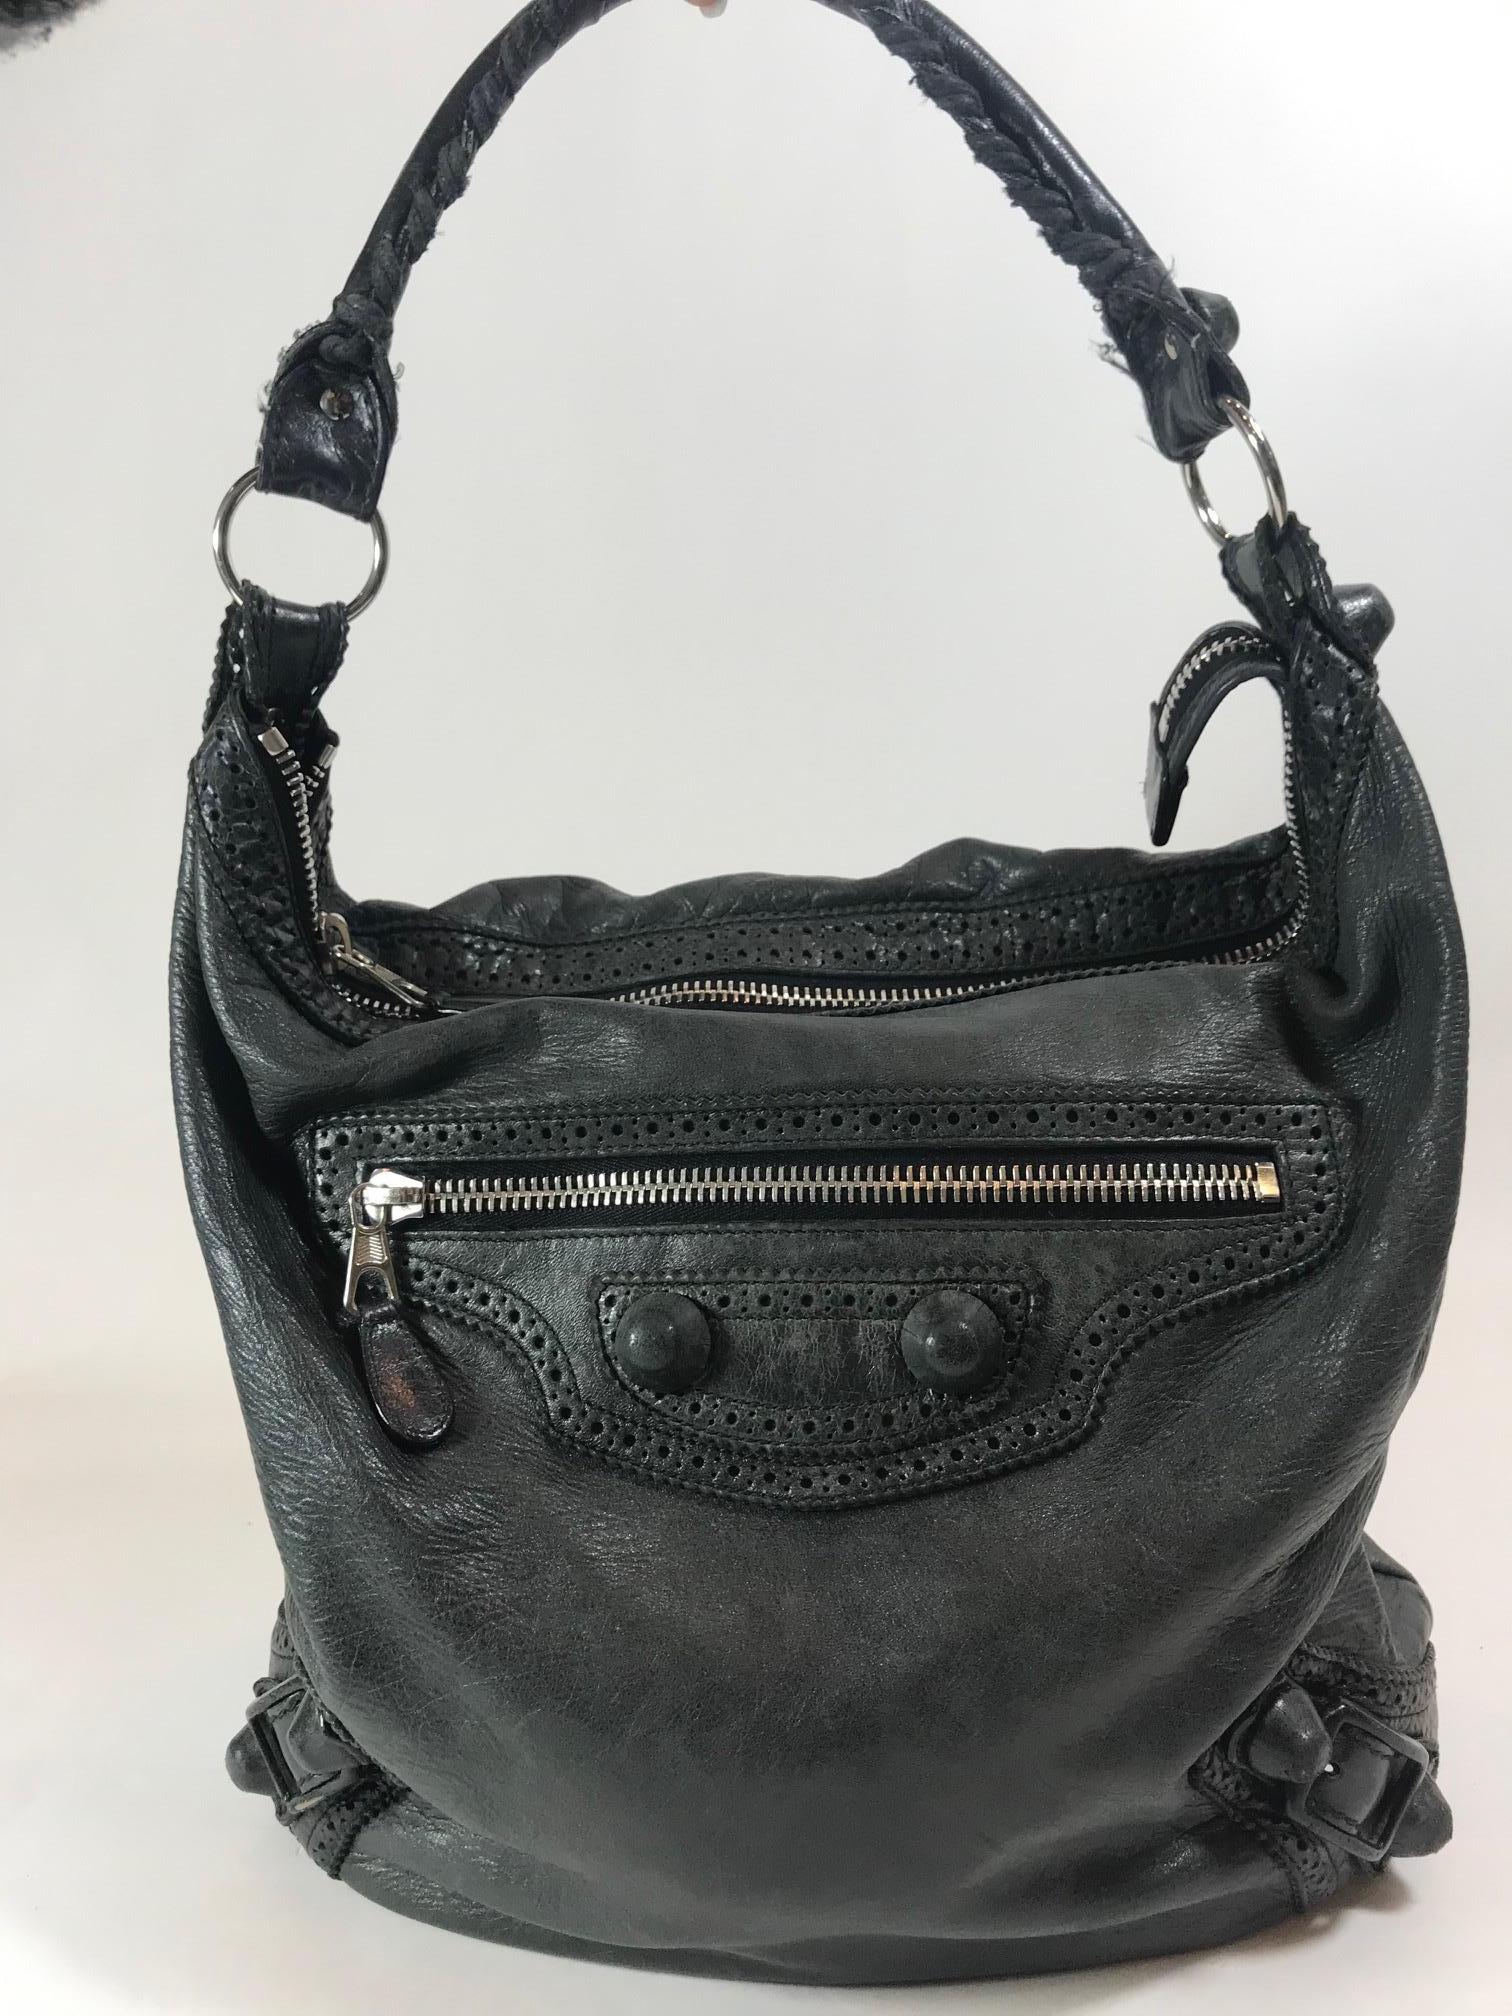 Black Arena leather. Silver-tone hardware. Zip closure at top. Single rolled top handle with metal ring accents and whipstitch detail. Single exterior zippered pocket at front. Featuring covered Giant stud accents. Perforated leather trim. Black